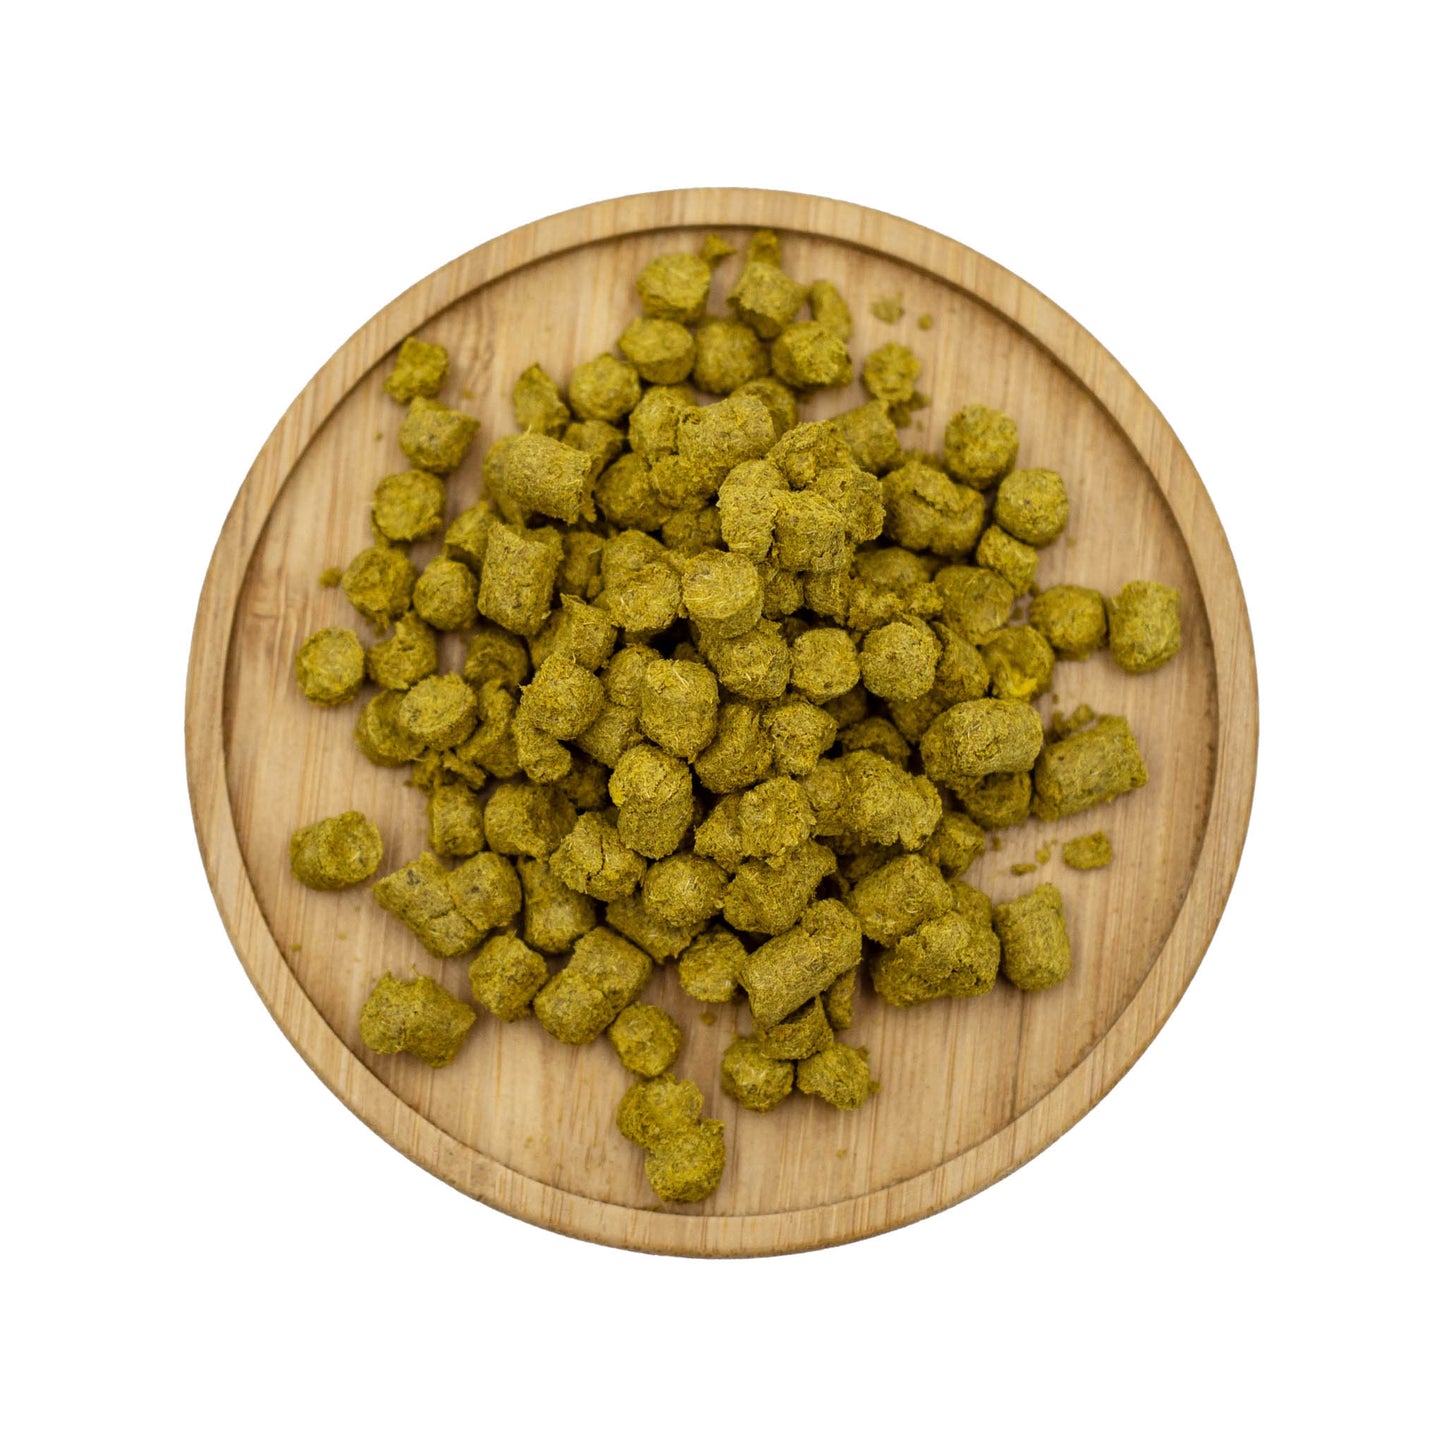 50g packet of Colombus hops for beer making